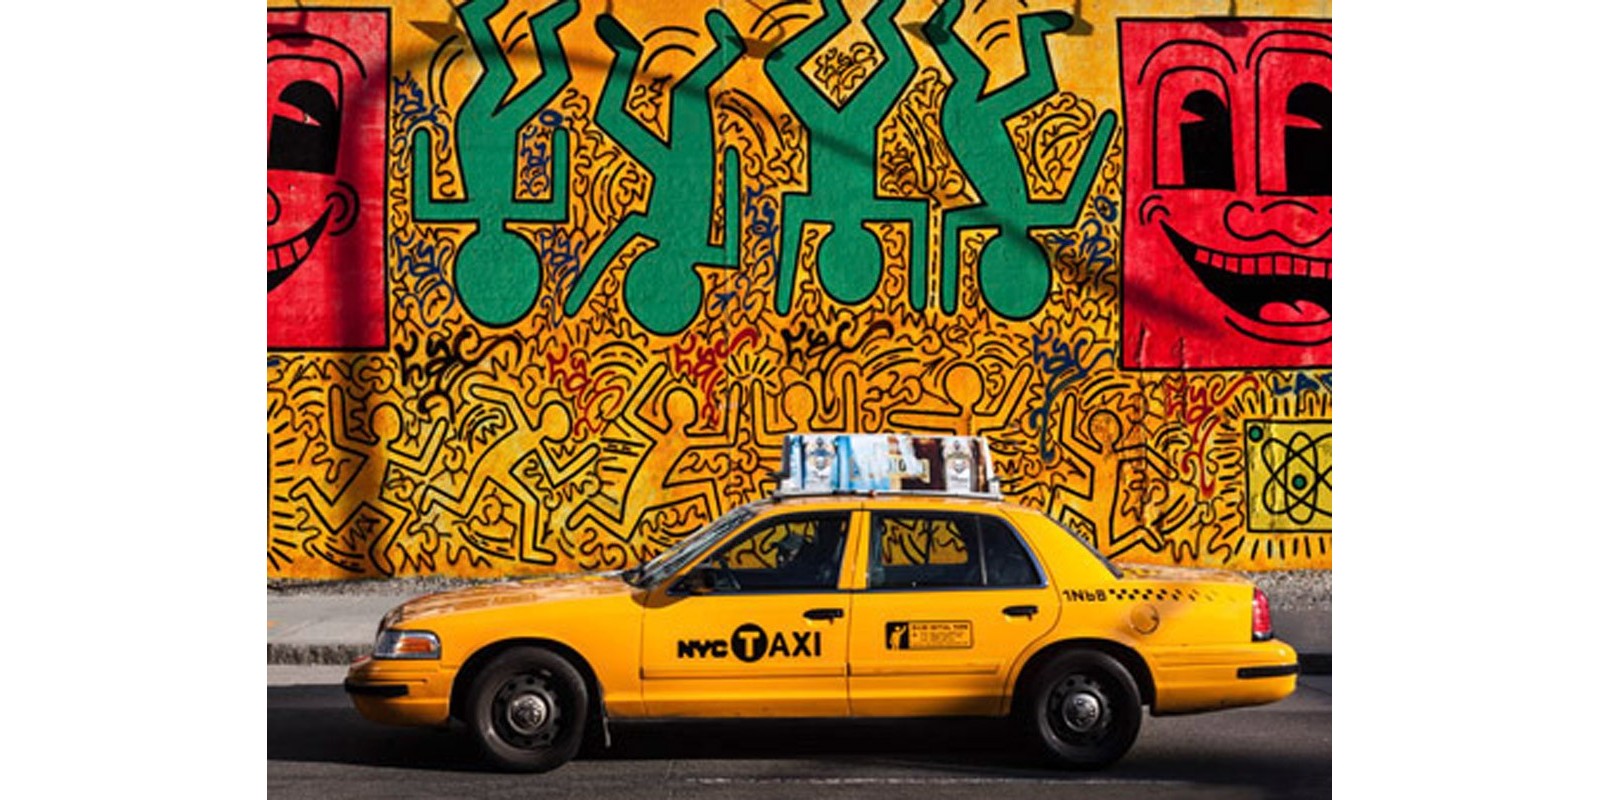 Michel Setboun - Taxi and mural painting, NYC